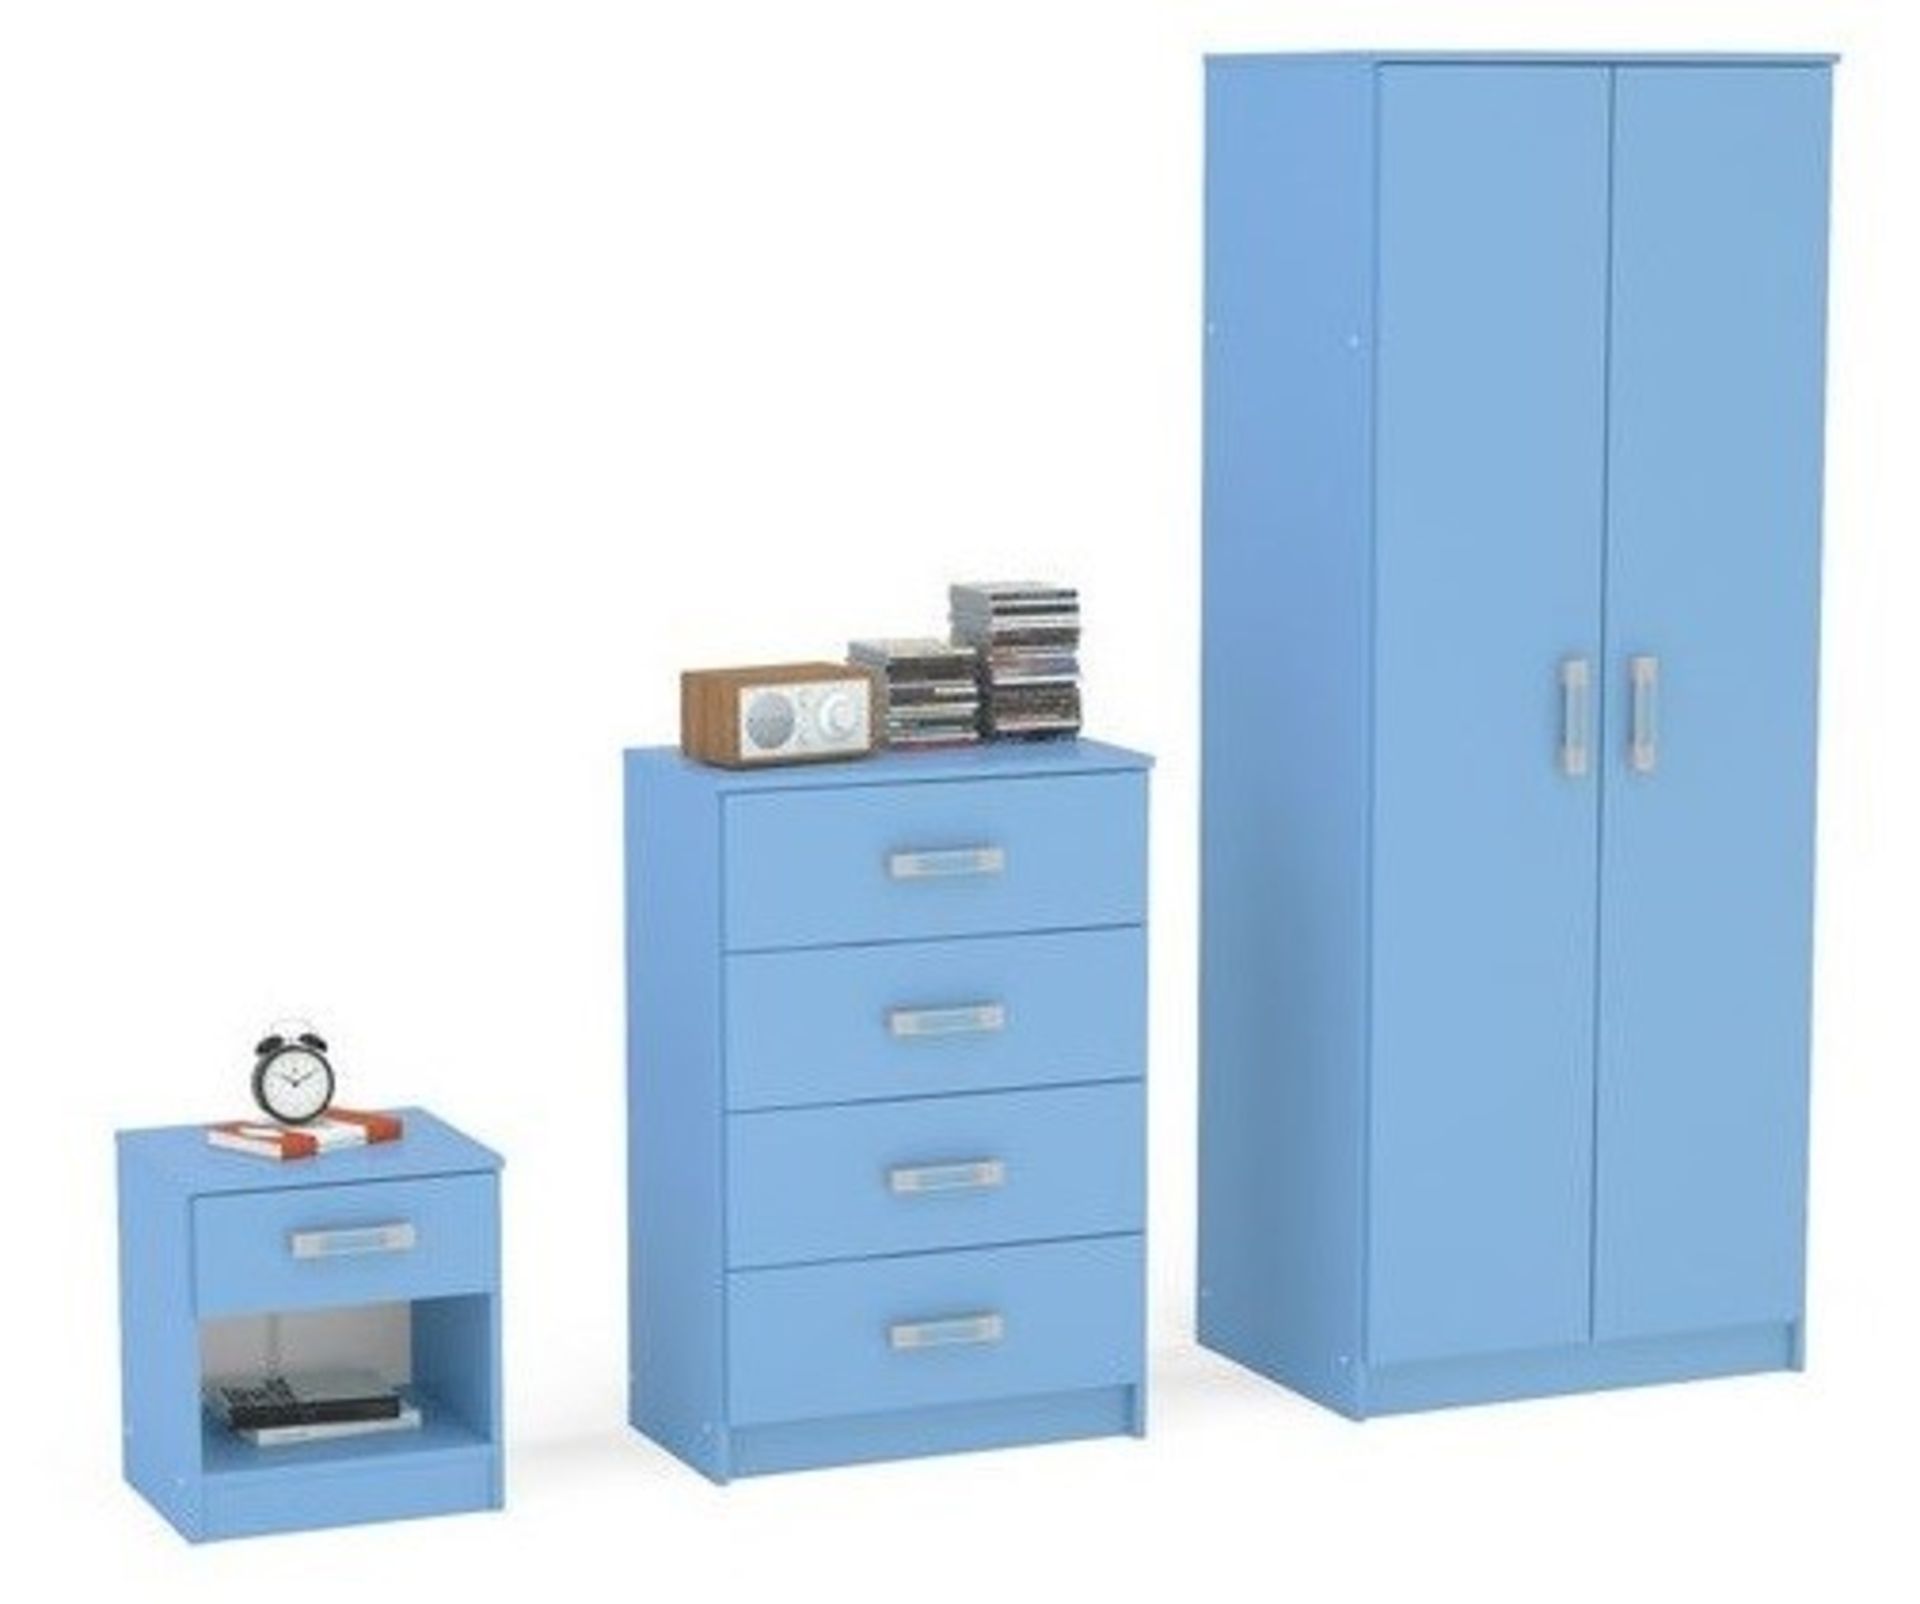 1 x "TRIO" High Gloss 3-Piece Bedroom Furniture Set In BLUE - Brand New & Boxed - Includes Wardrobe, - Image 2 of 4